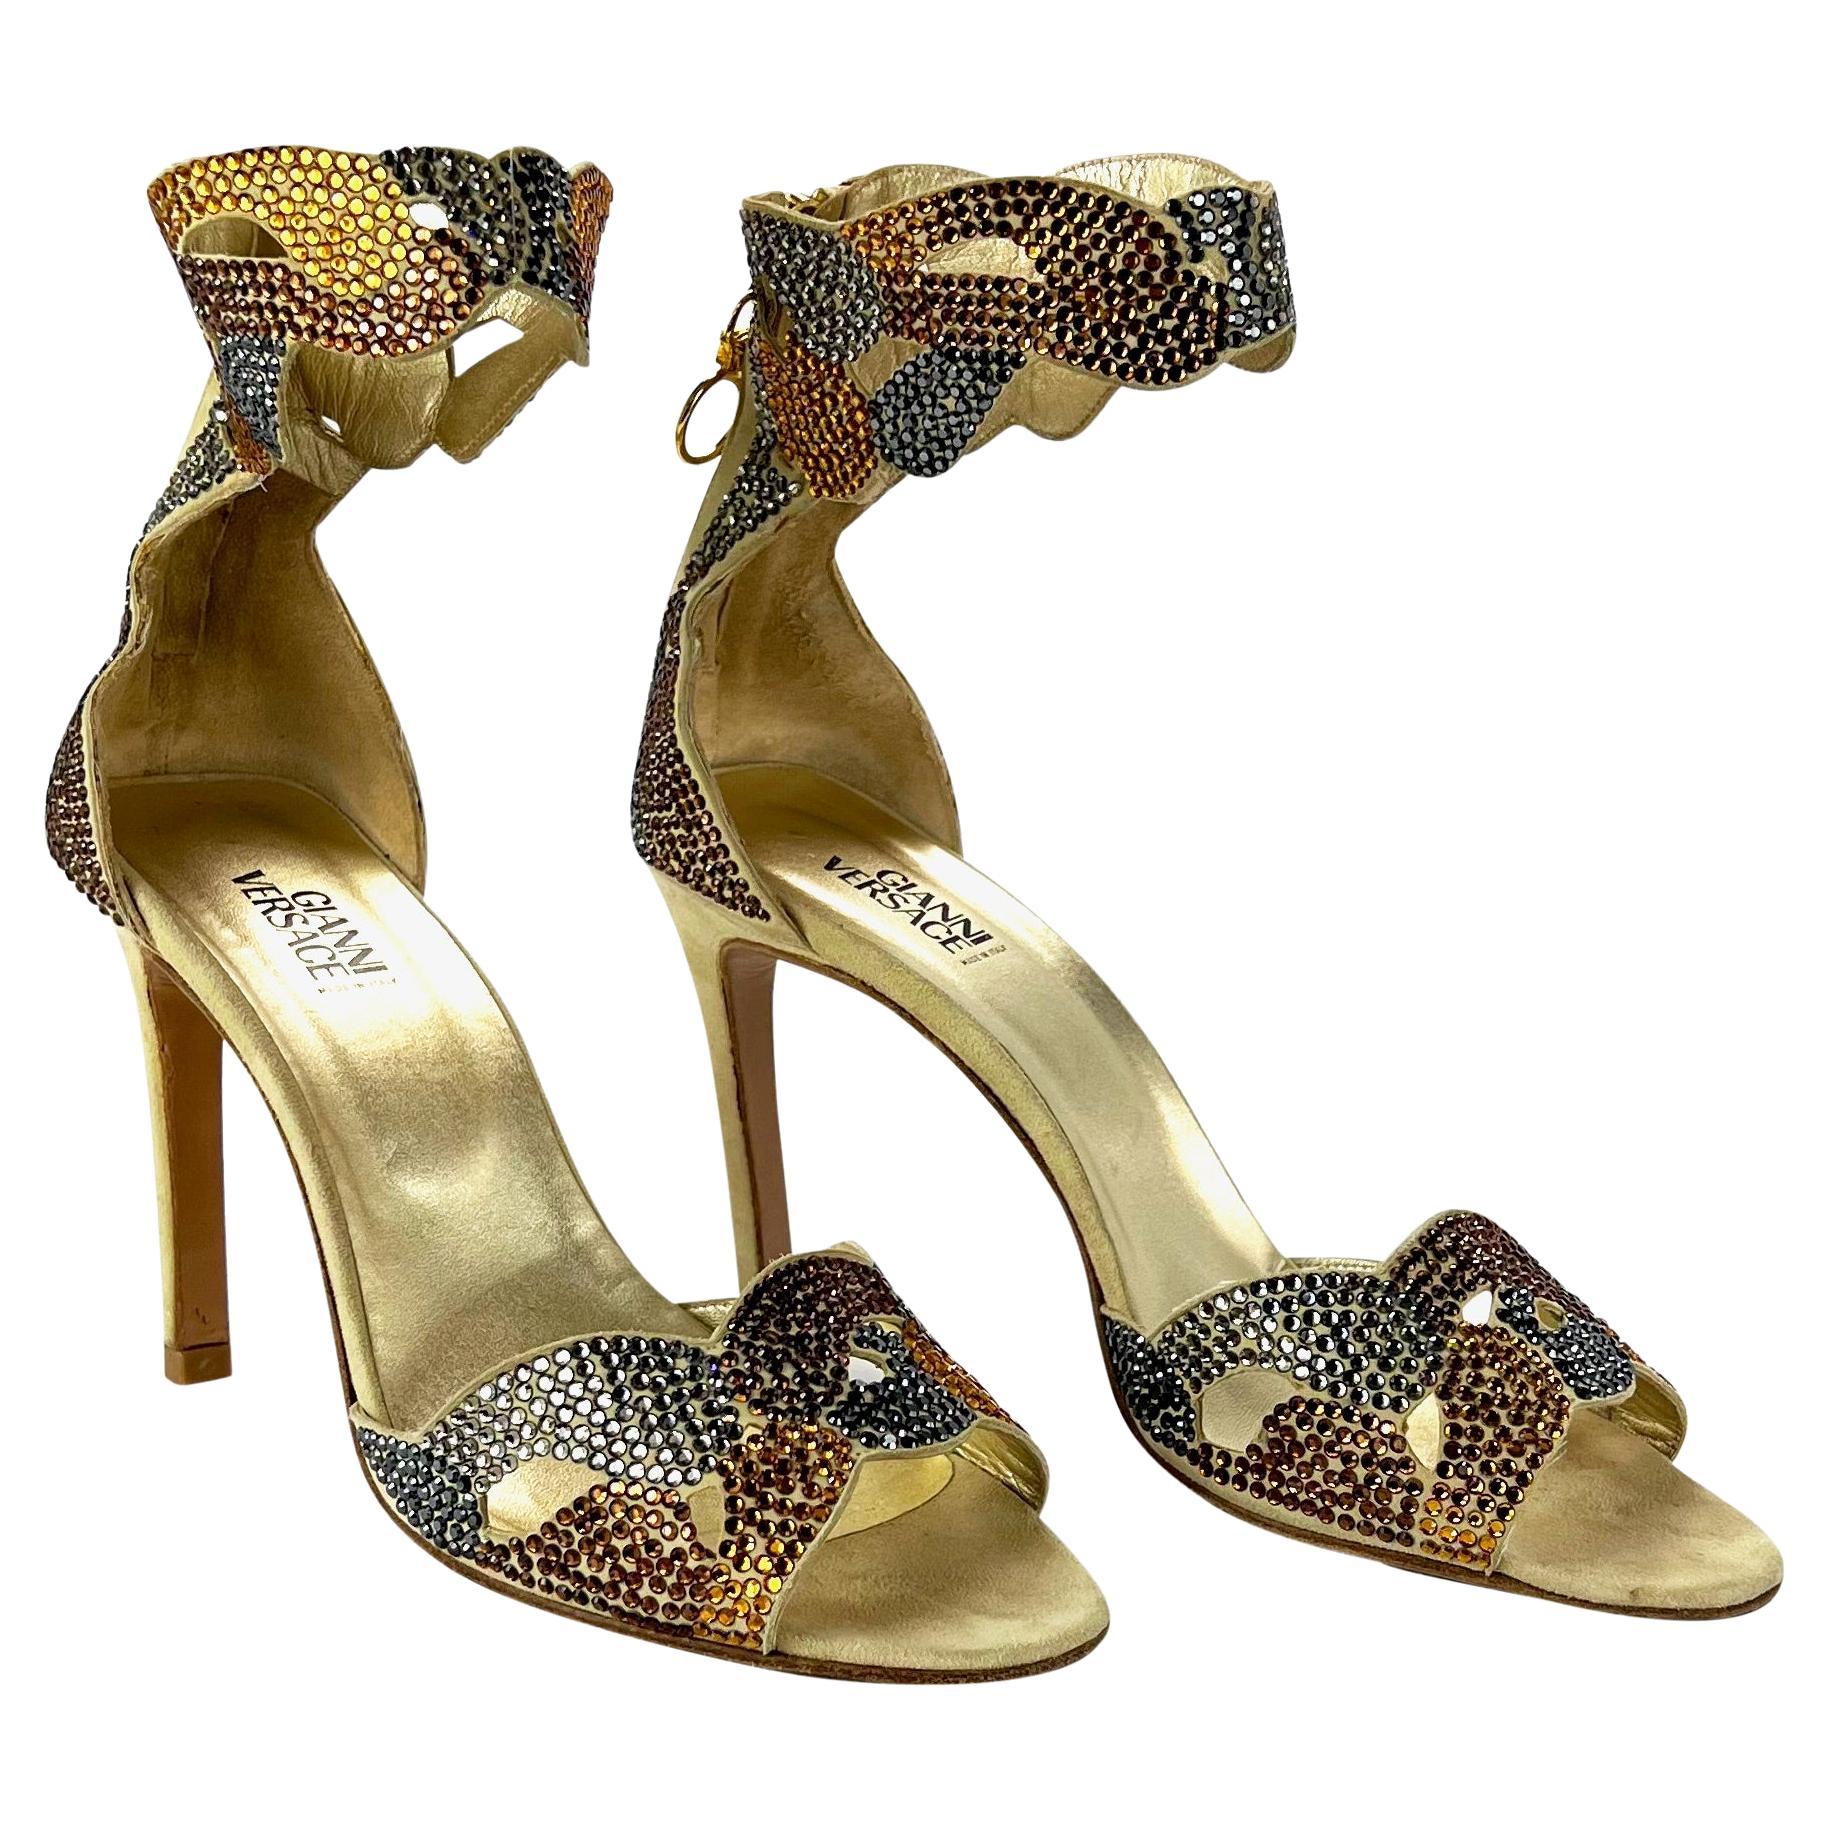 S/S 2000 Gianni Versace by Donatella Versace Crystal Pump Size 39 For Sale 1